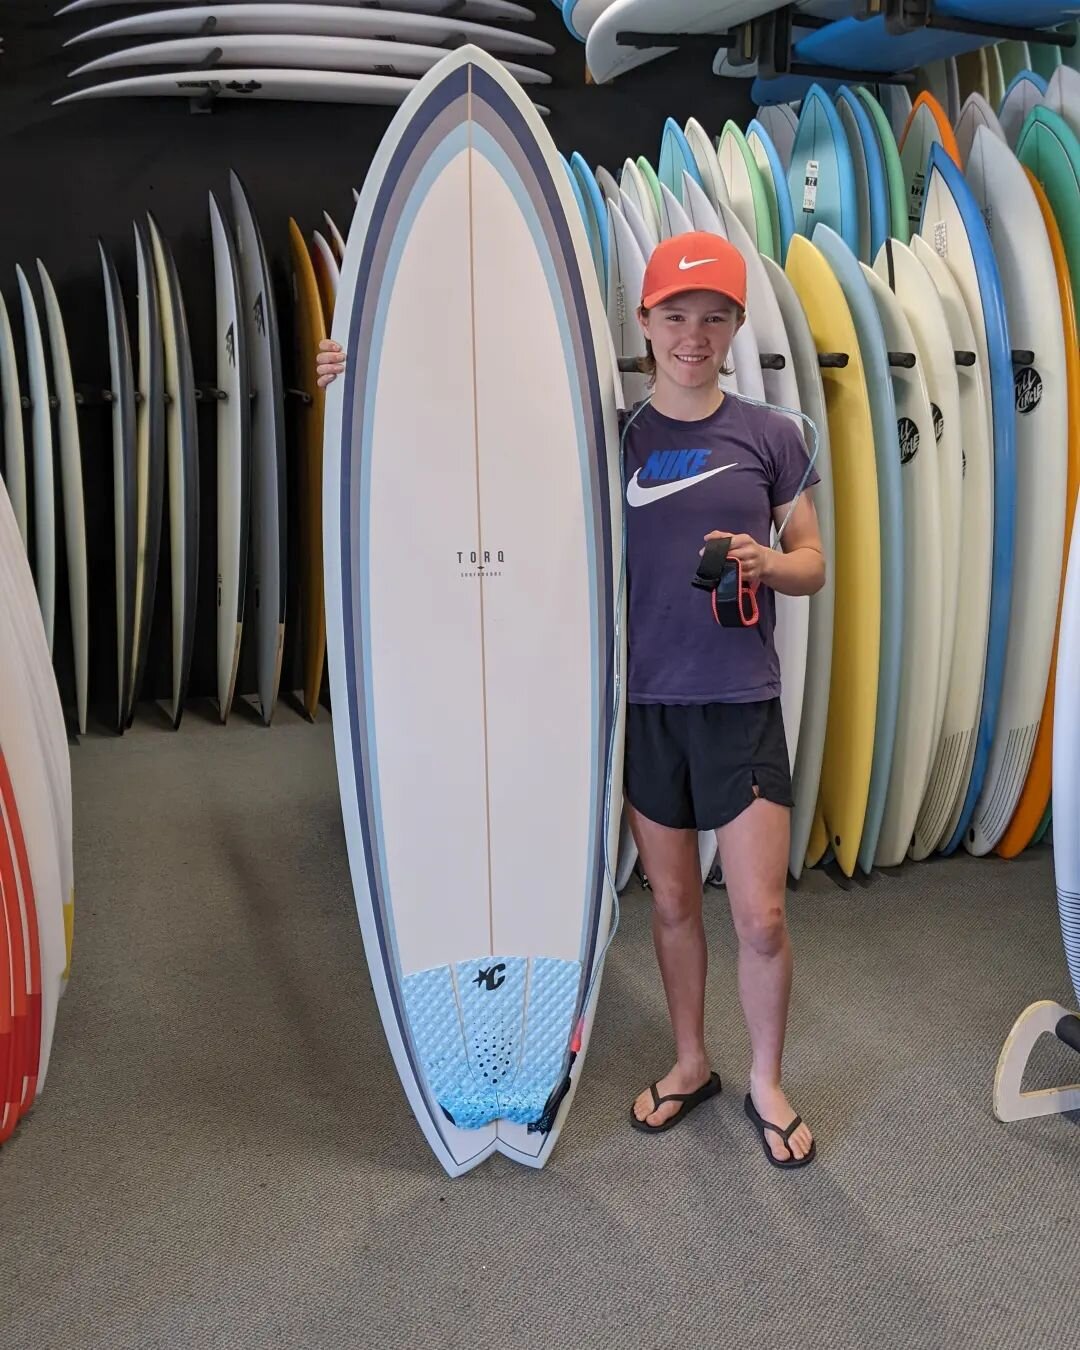 Santa and his wife have  been  very busy... The sleigh will be loaded. One of the elf's told me they are making Oli a 6'3 Torq fish # creaturesofleisure # oceanandearth #fun #summer #waves #surf #phillipisland